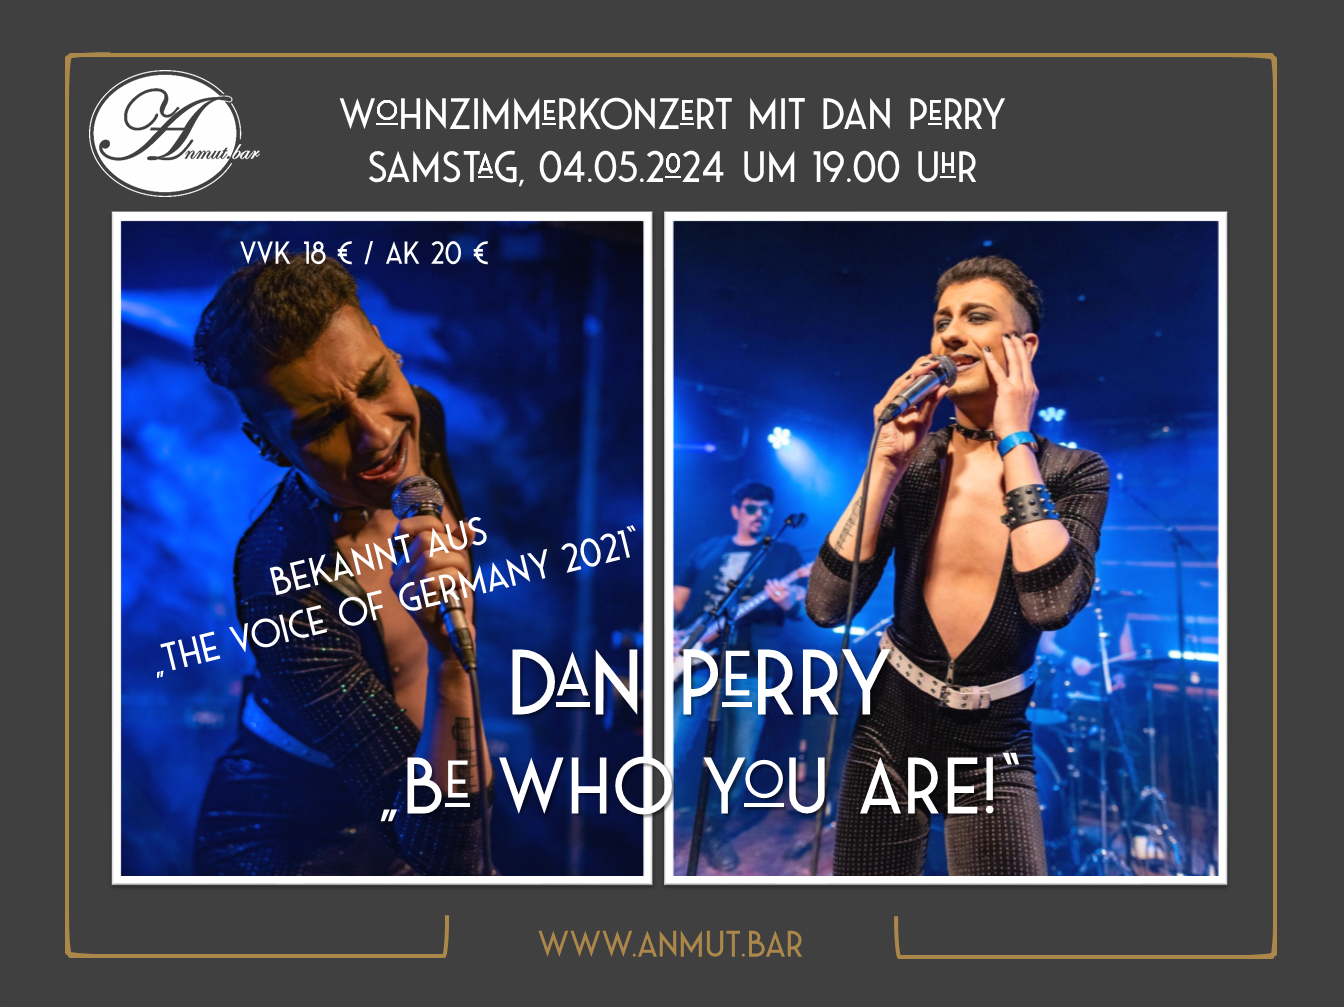 Wohnzimmerkonzert: Dan Perry „Be who you are!“